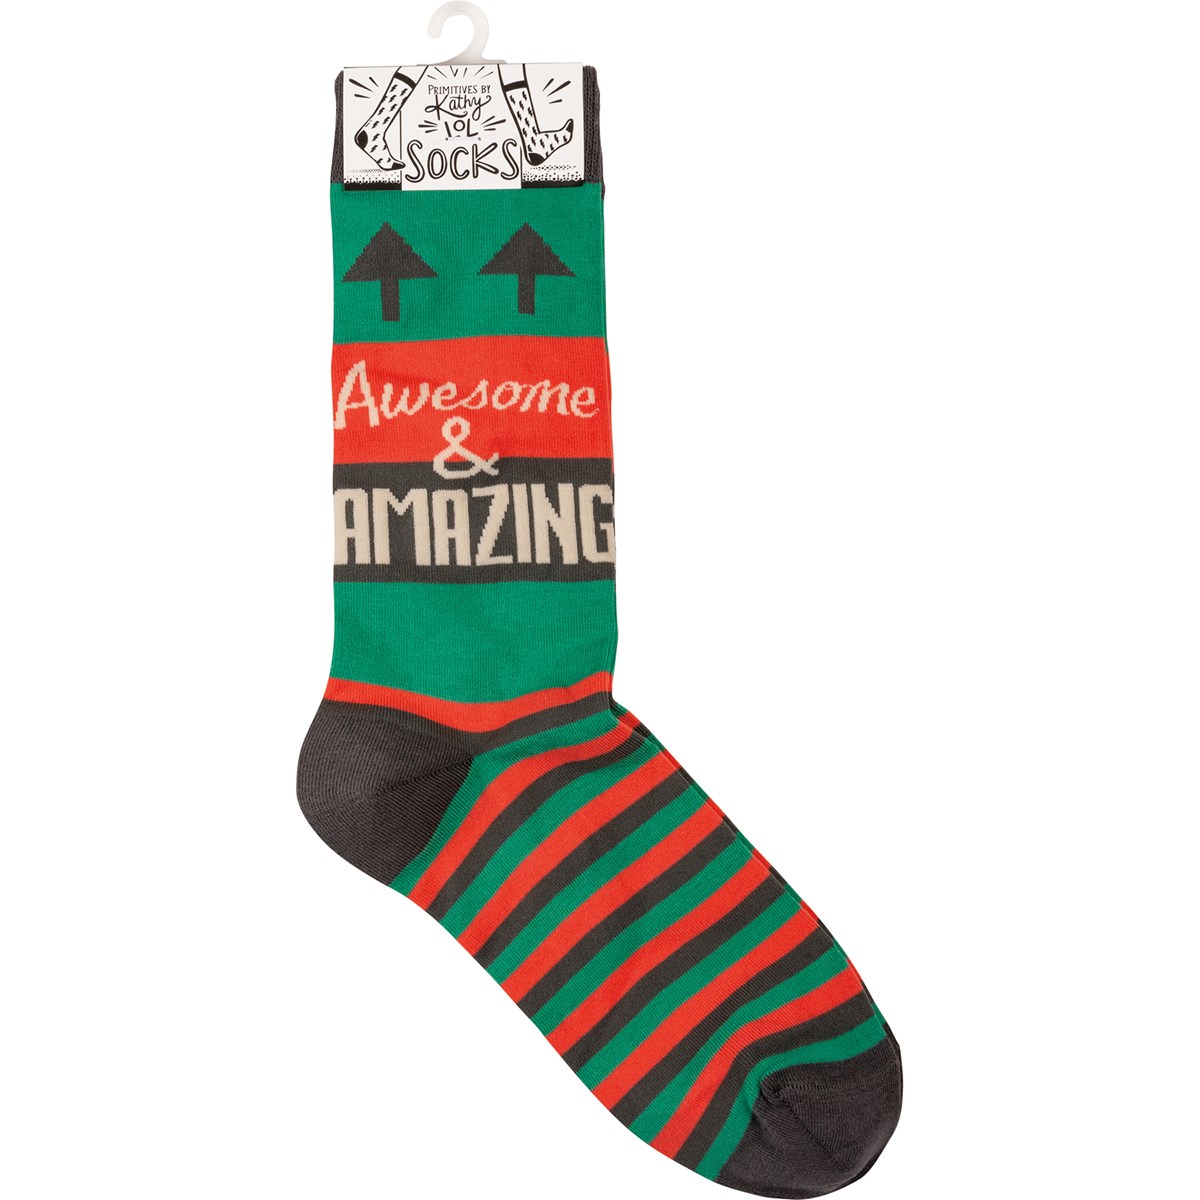 Socks - Awesome & Amazing - One Size Fits Most - Cotton, Nylon, Spandex